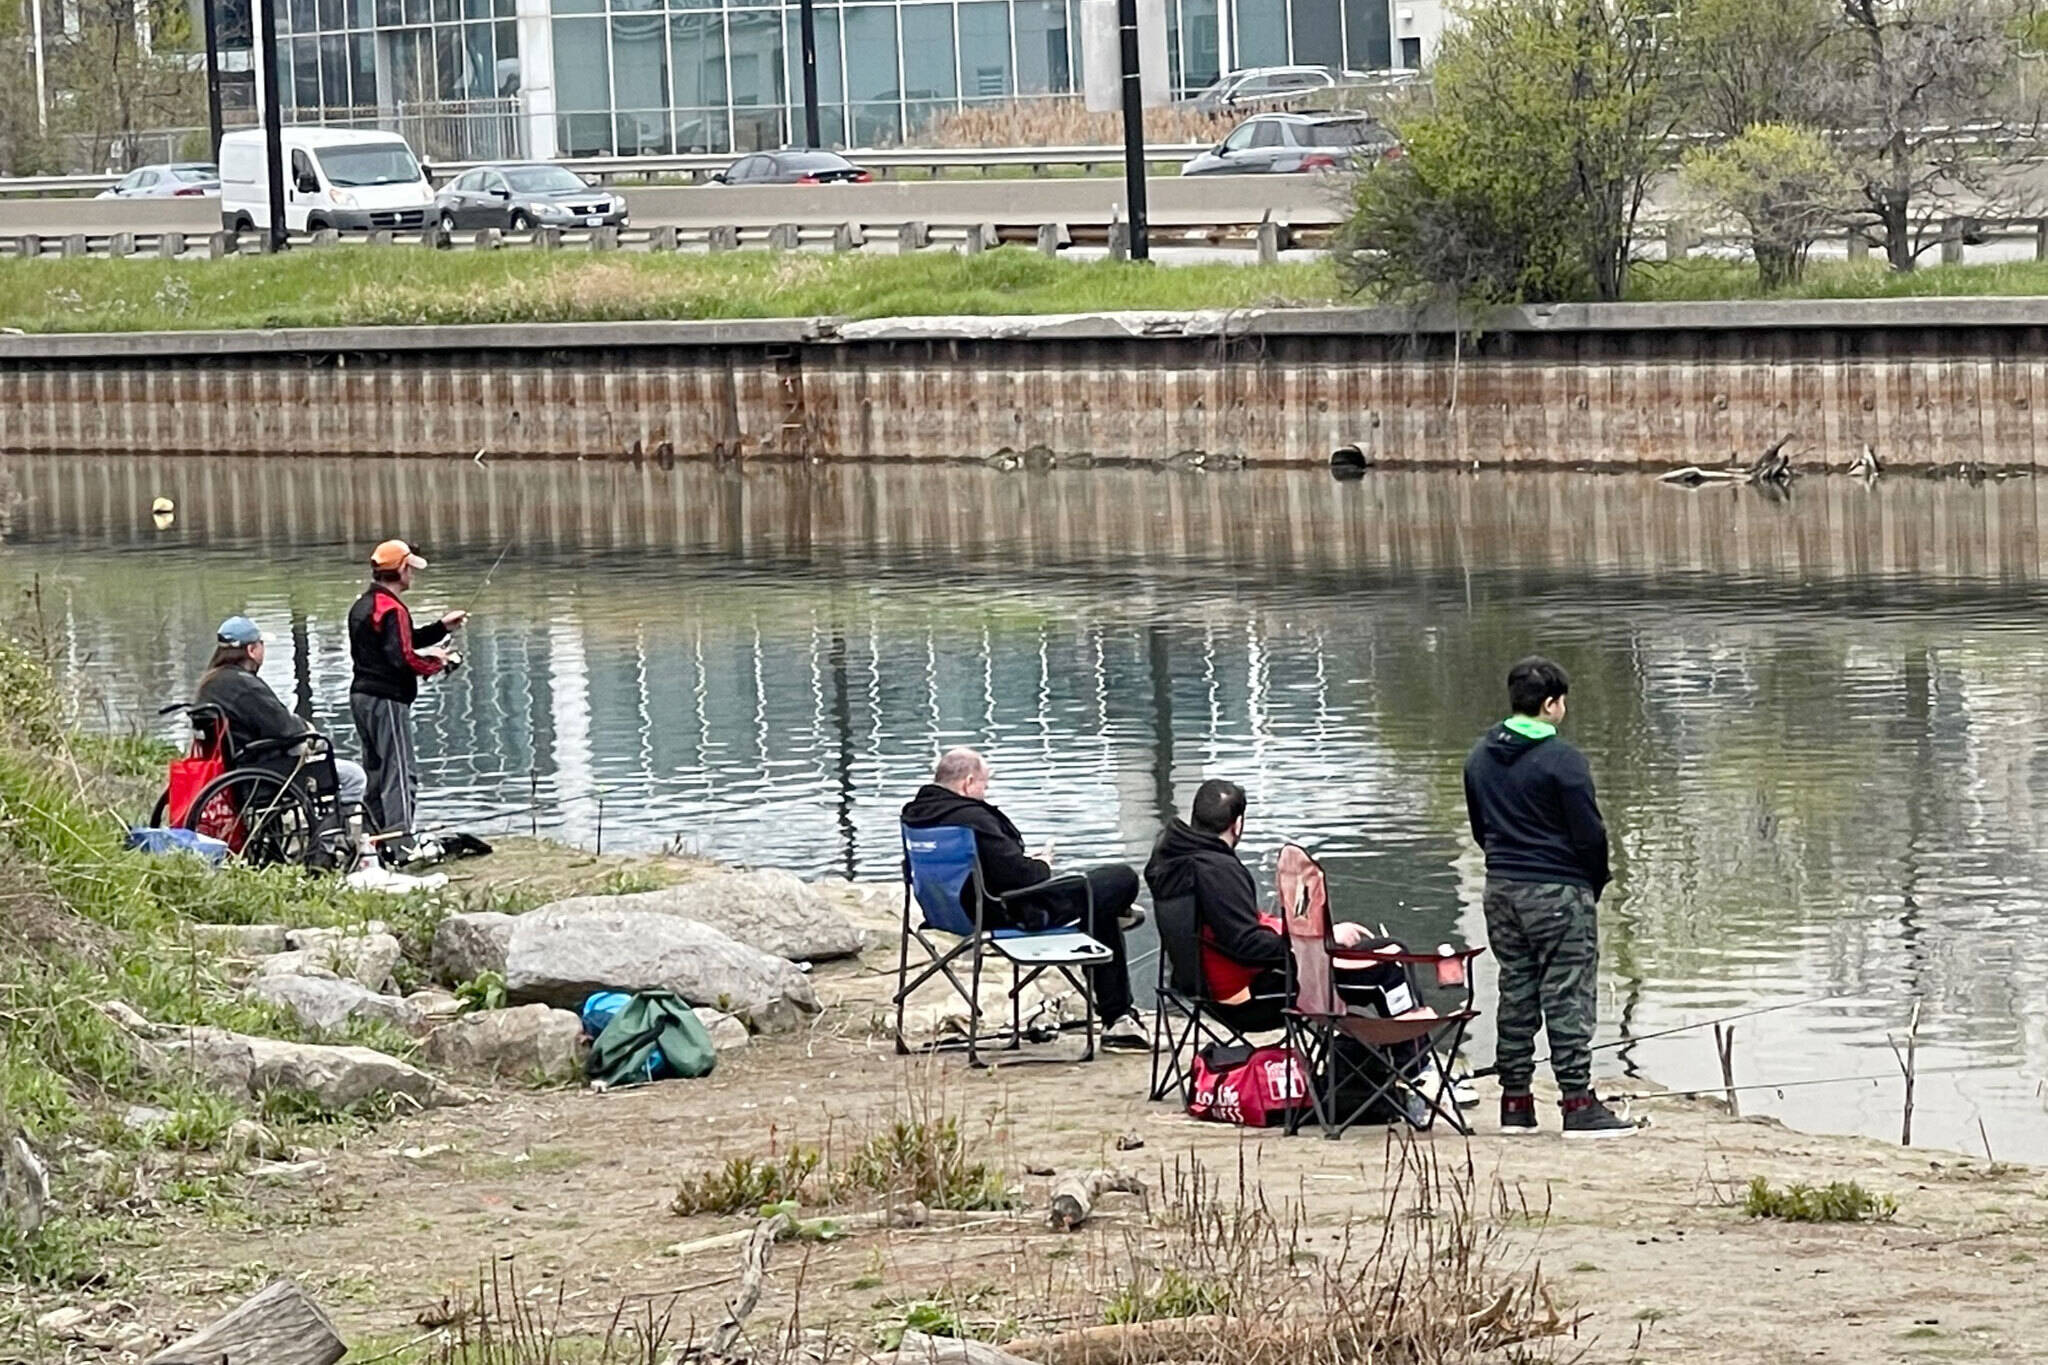 People are now fishing just steps from a King St. streetcar stop